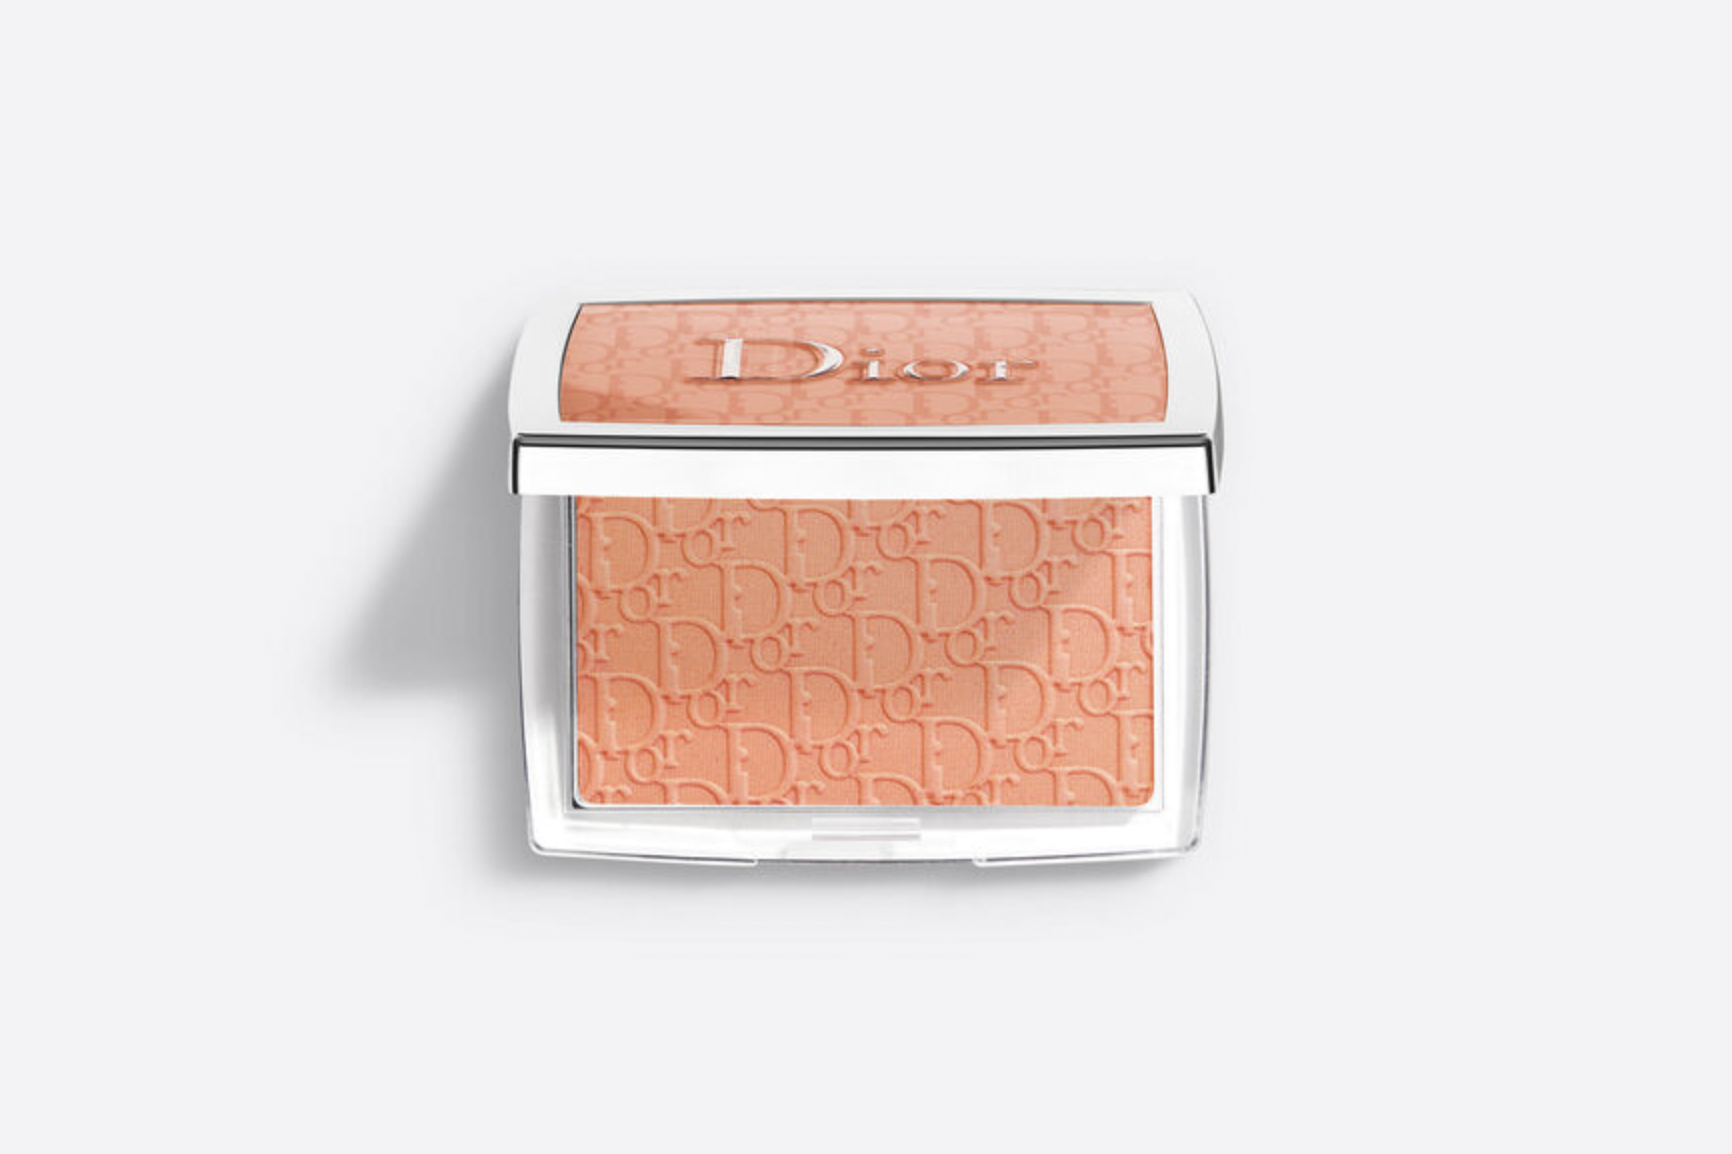 Dior Backstage Rosy Glow Blush in ‘Coral’ ($40.00)